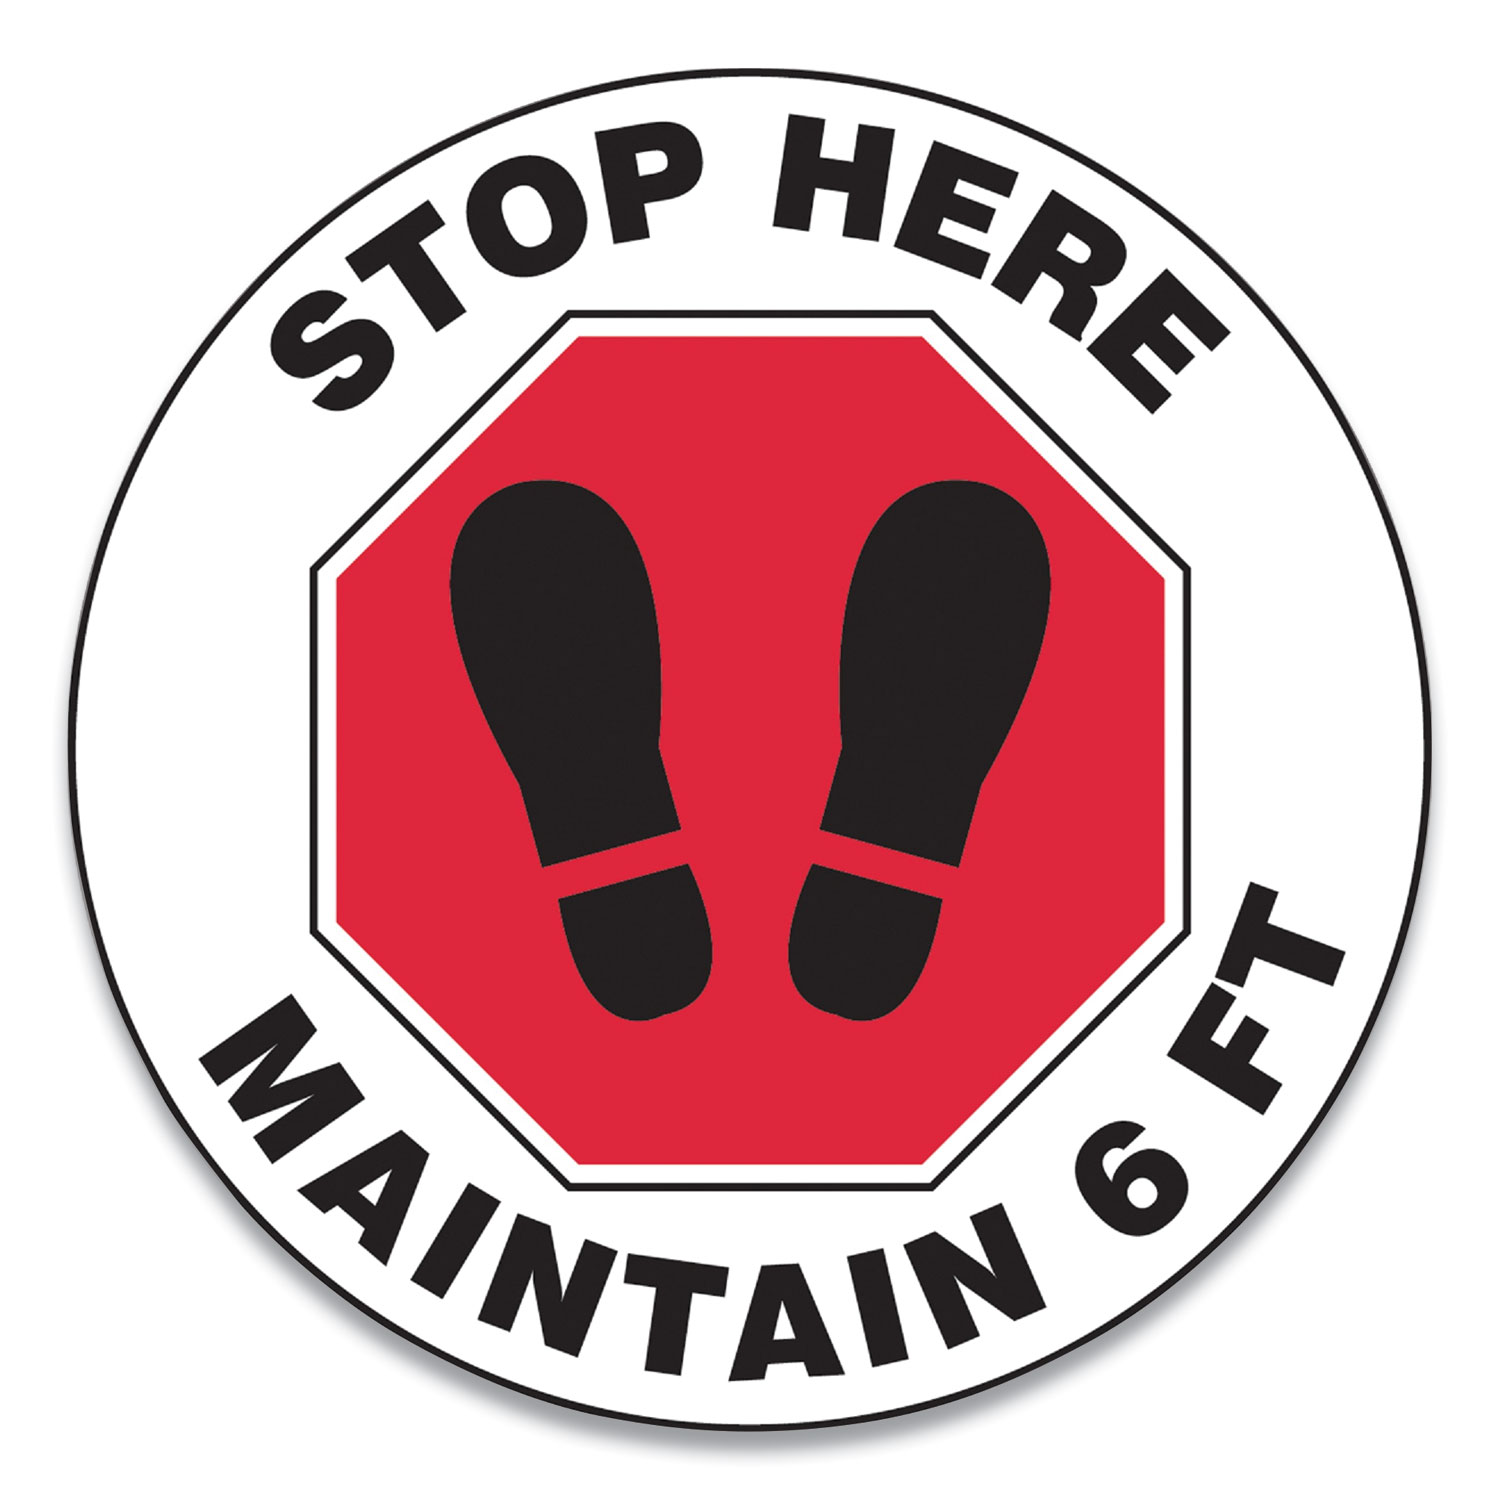  Accuform MFS390ESP Slip-Gard Social Distance Floor Signs, 17 Circle, Stop Here Maintain 6 ft, Footprint, Red/White, 25/Pack (GN1MFS390ESP) 